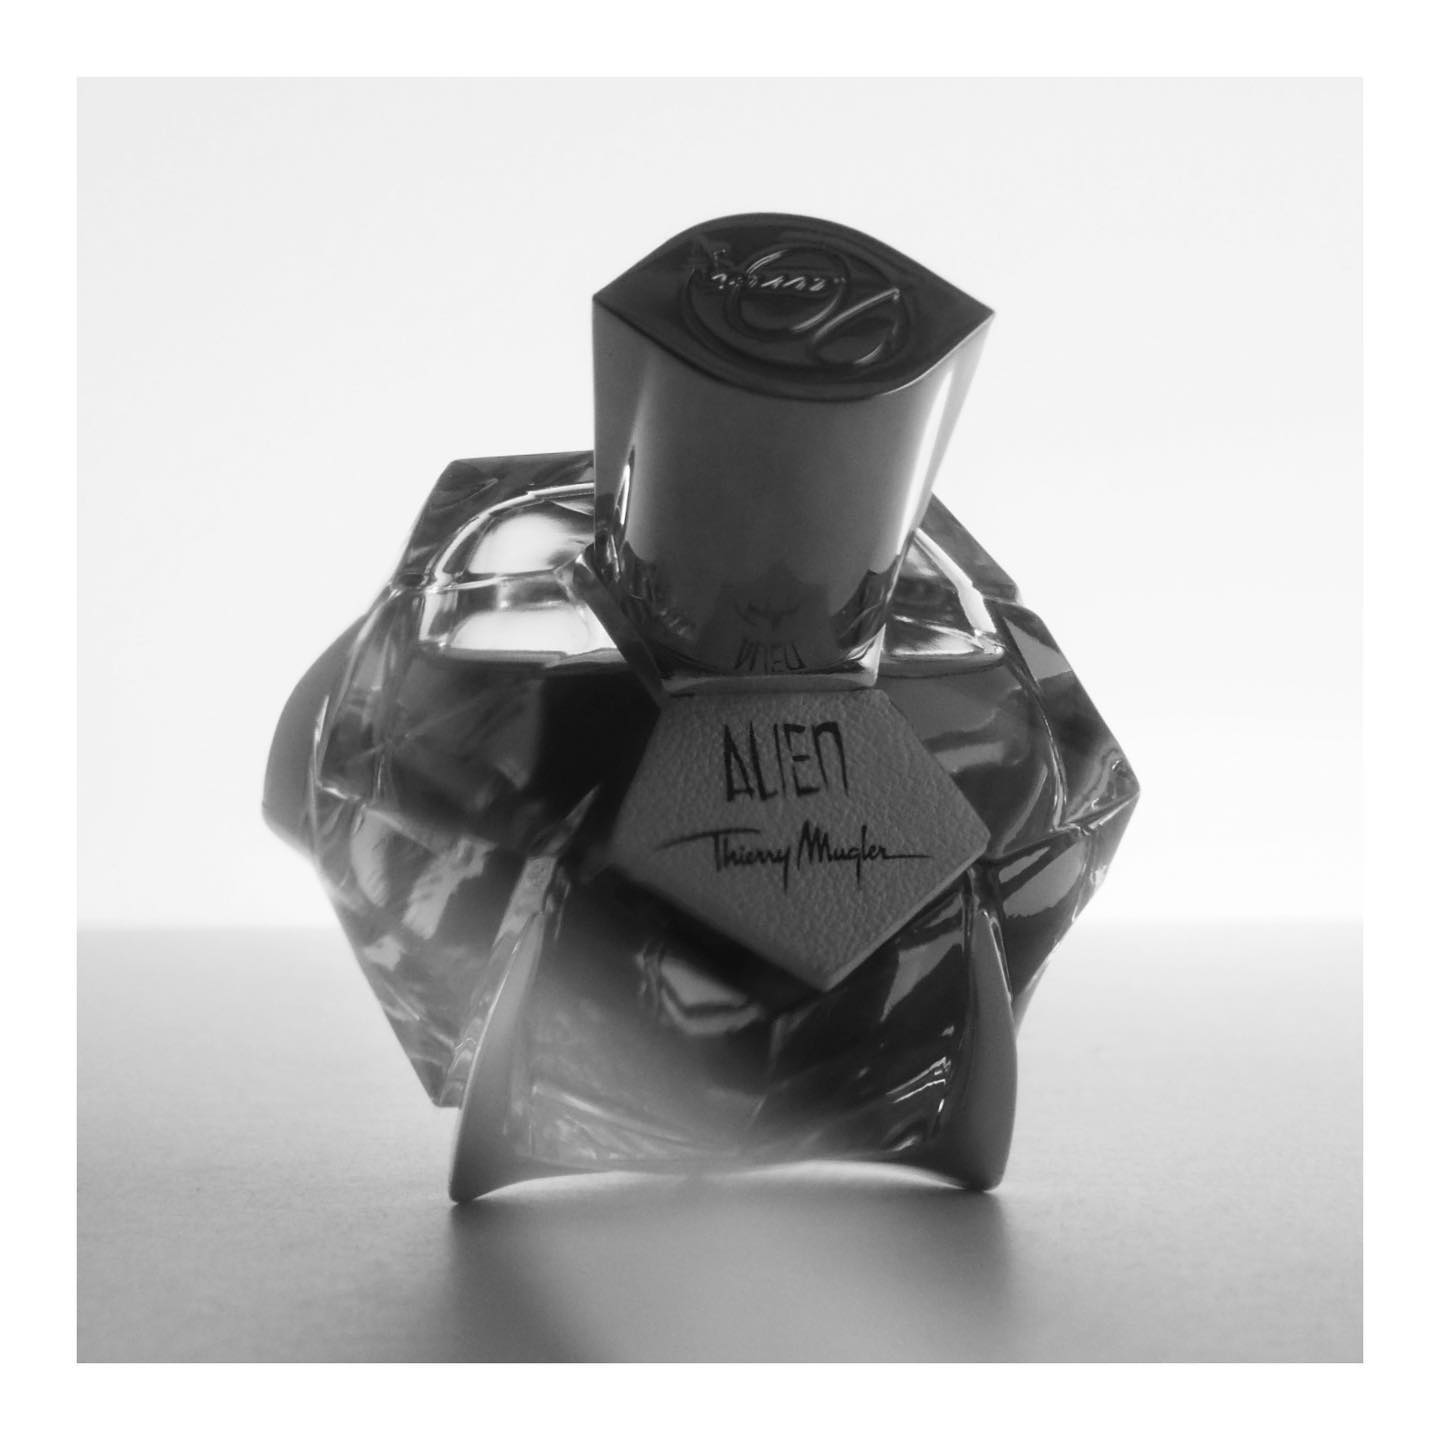 Spoke about it not too long ago, but here we are again...
 
Multiple falls favorite form my collection. I made sure I will never run out of it and can cover myself head to toes with this gorgeous orange blossom leather.
 
If ever recreated in current decade, it would be close to the top of the niche frag chain👌🏻
 
@muglerofficial #nicheperfumes #nicheperfumery #nicheperfume #nichefragrance #nichefragrances #nichescent #nicheparfum #instaperfume #luxuryperfume #fragrancecollection #instafragrance #perfumelove #perfumelover #harrodsbeauty #profumidinicchia #nischendüfte #thierrymugler #fallfragrance #perfumeblogger #fragranze #teamoversprayers #fragrancearmy #growdeparfum #collectionpotential #fragpixie #perfumereview #mugler #alien #muglercuir #aliencuir